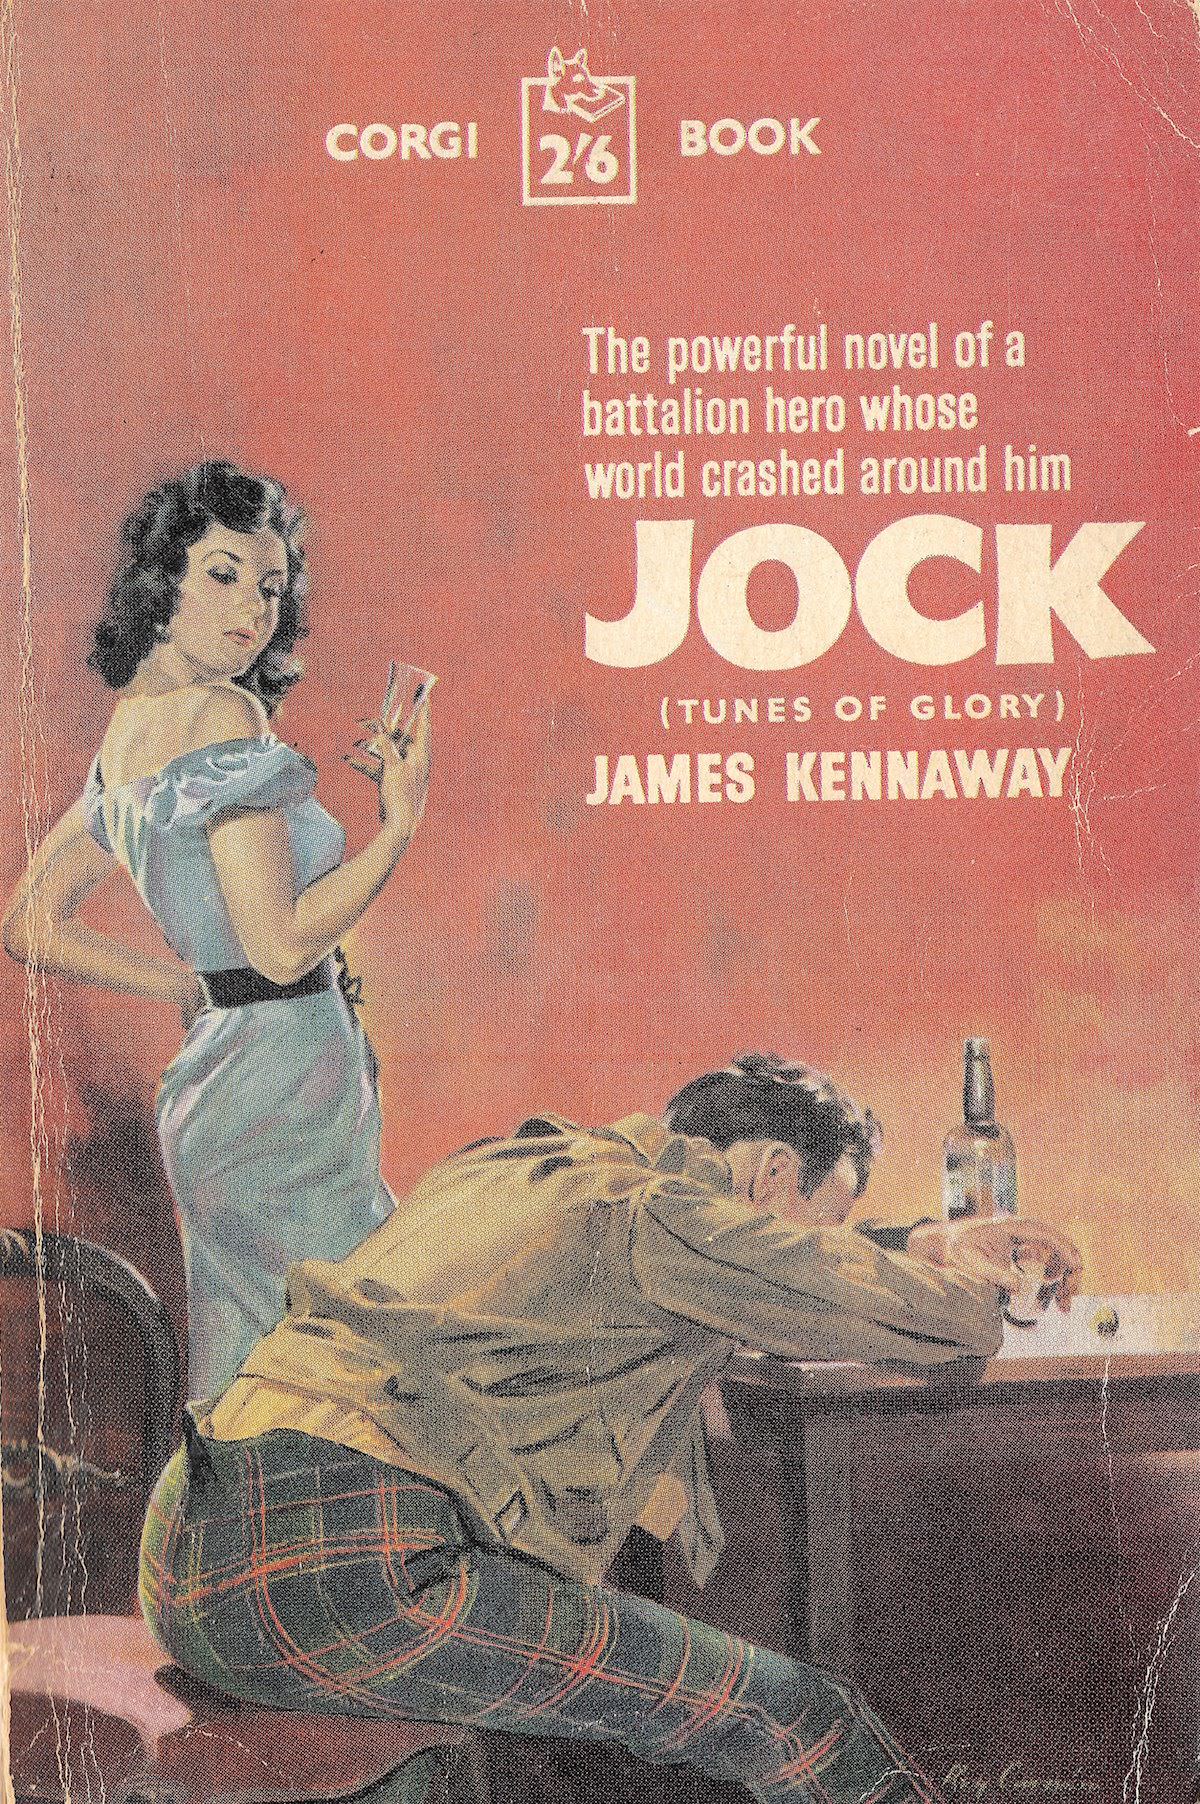 James Kennaway’s first novel ‘Tunes of Glory’ (1956) was a critical success later made into a movie starring Alec Guinness and John Mills in 1960.